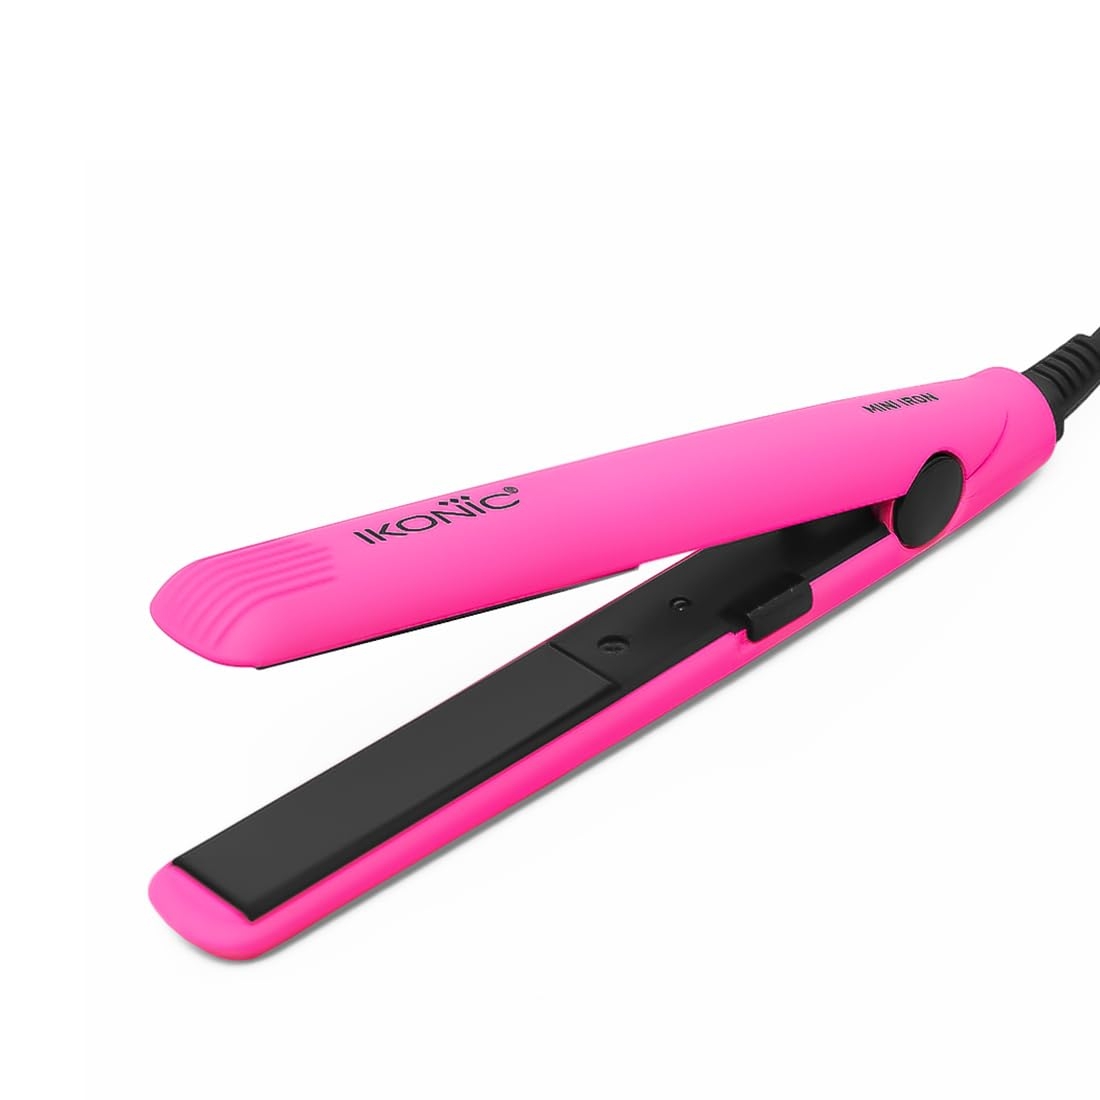 Ikonic Mini Iron Hair Straightener | Compact Size | Instant Heat Technology | Mini Plates | for Small Hair & Bangs